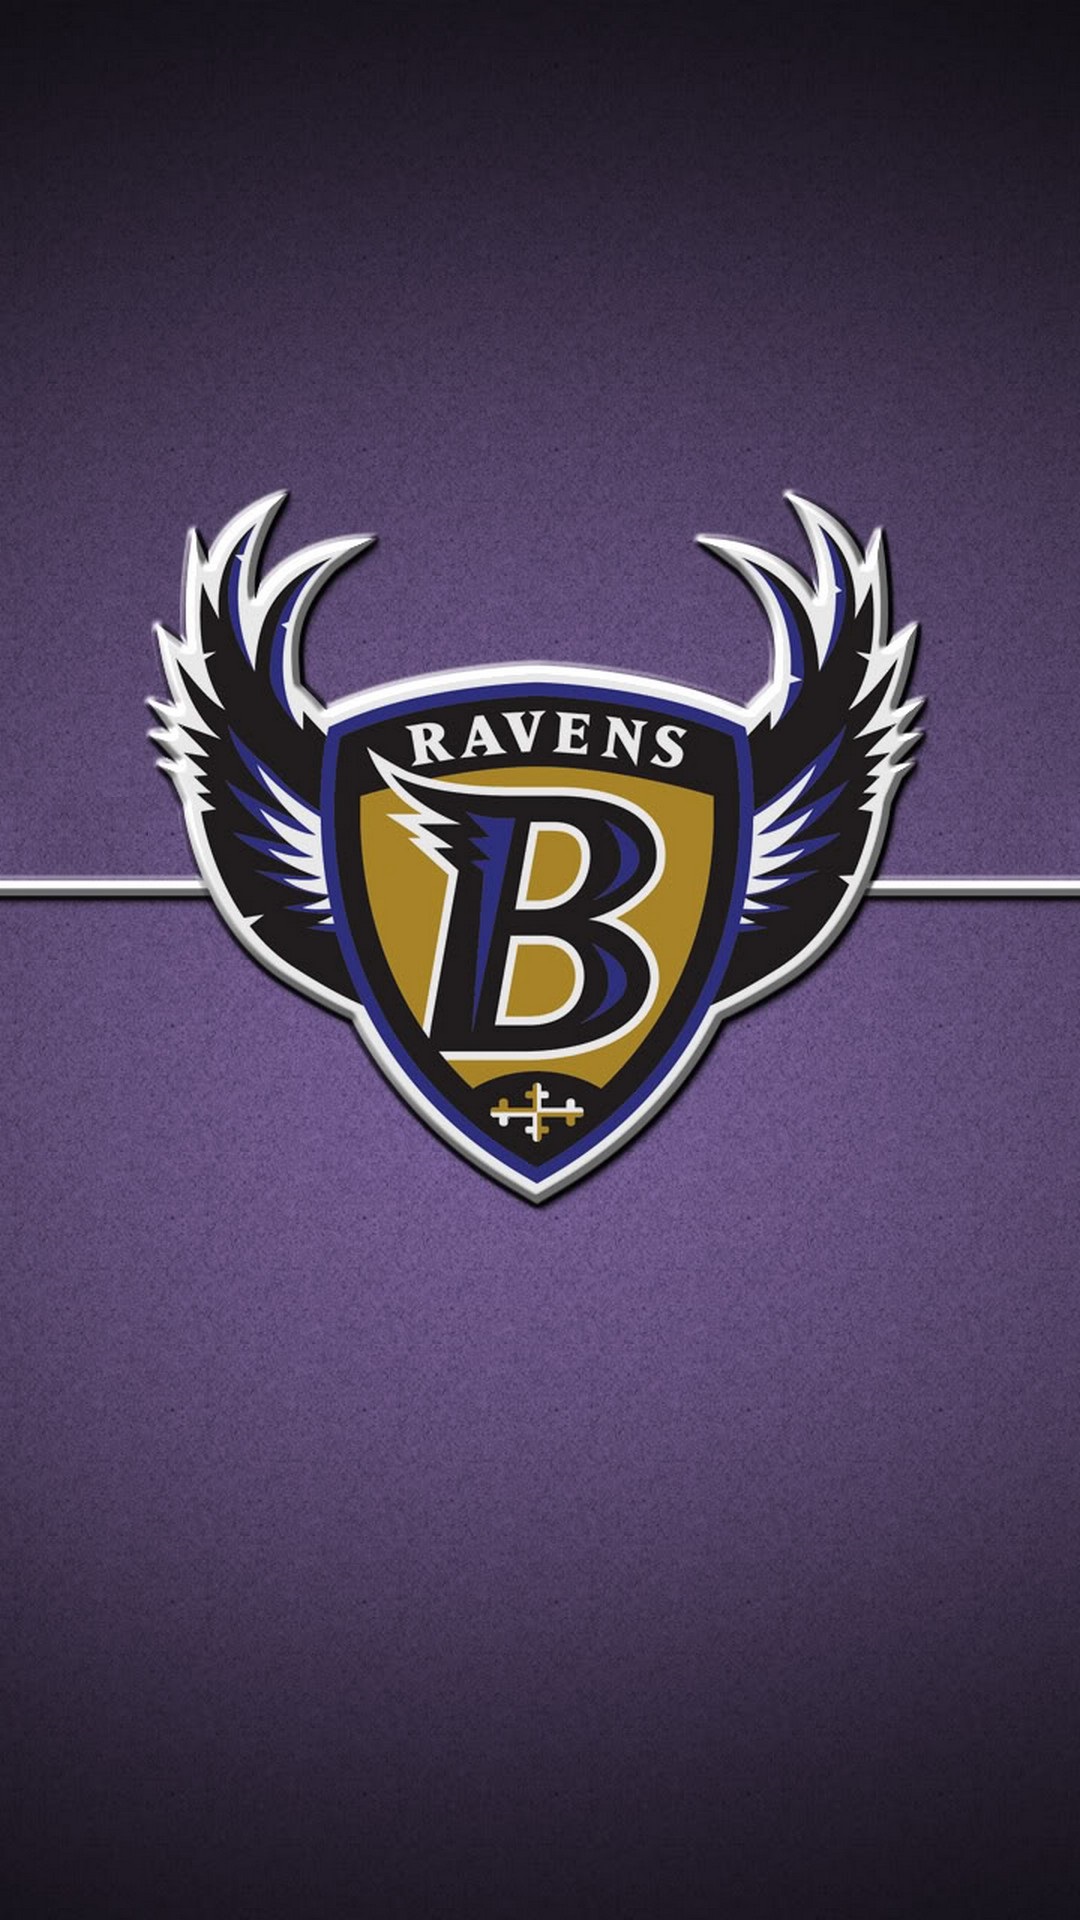 Baltimore Ravens iPhone Lock Screen Wallpaper With high-resolution 1080X1920 pixel. Donwload and set as wallpaper for your iPhone X, iPhone XS home screen backgrounds, XS Max, XR, iPhone8 lock screen wallpaper, iPhone 7, 6, SE, and other mobile devices